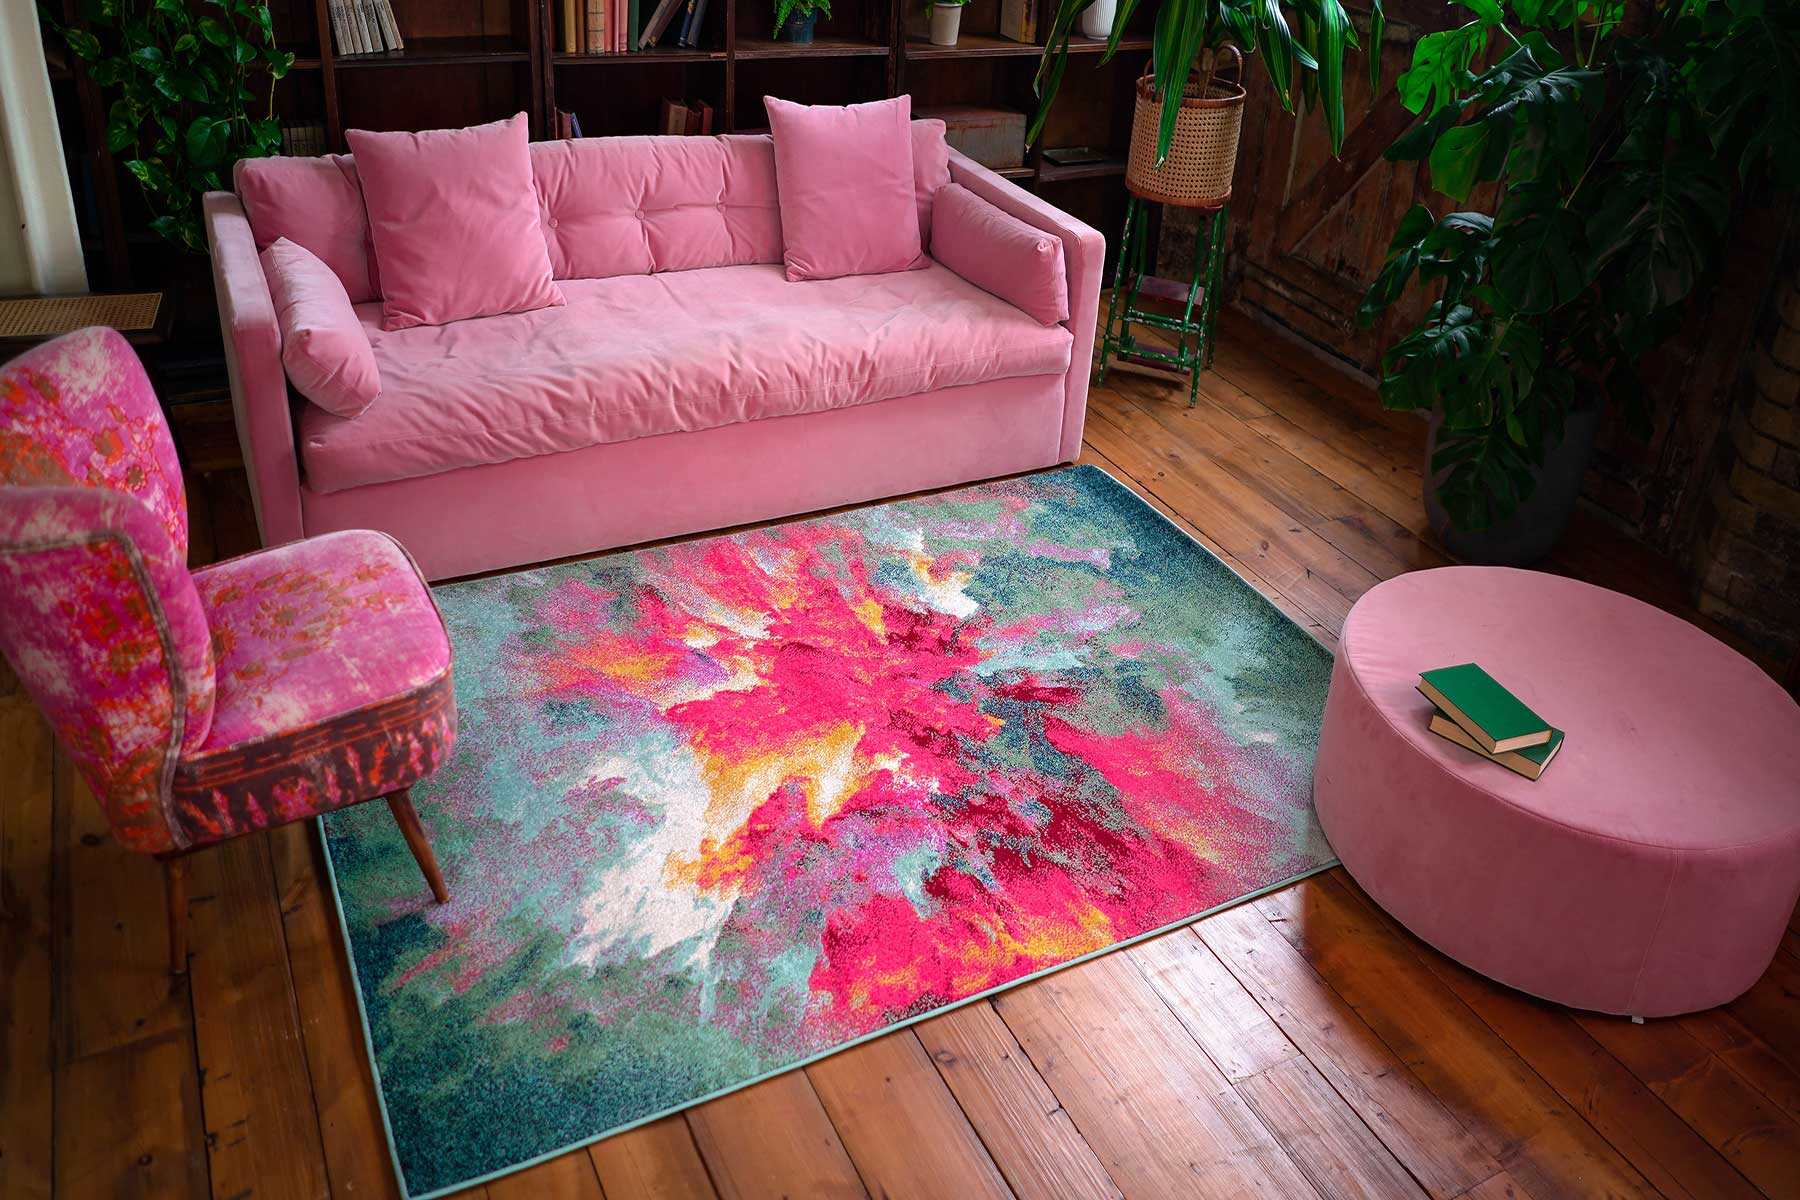 where to find awesome modern rugs?